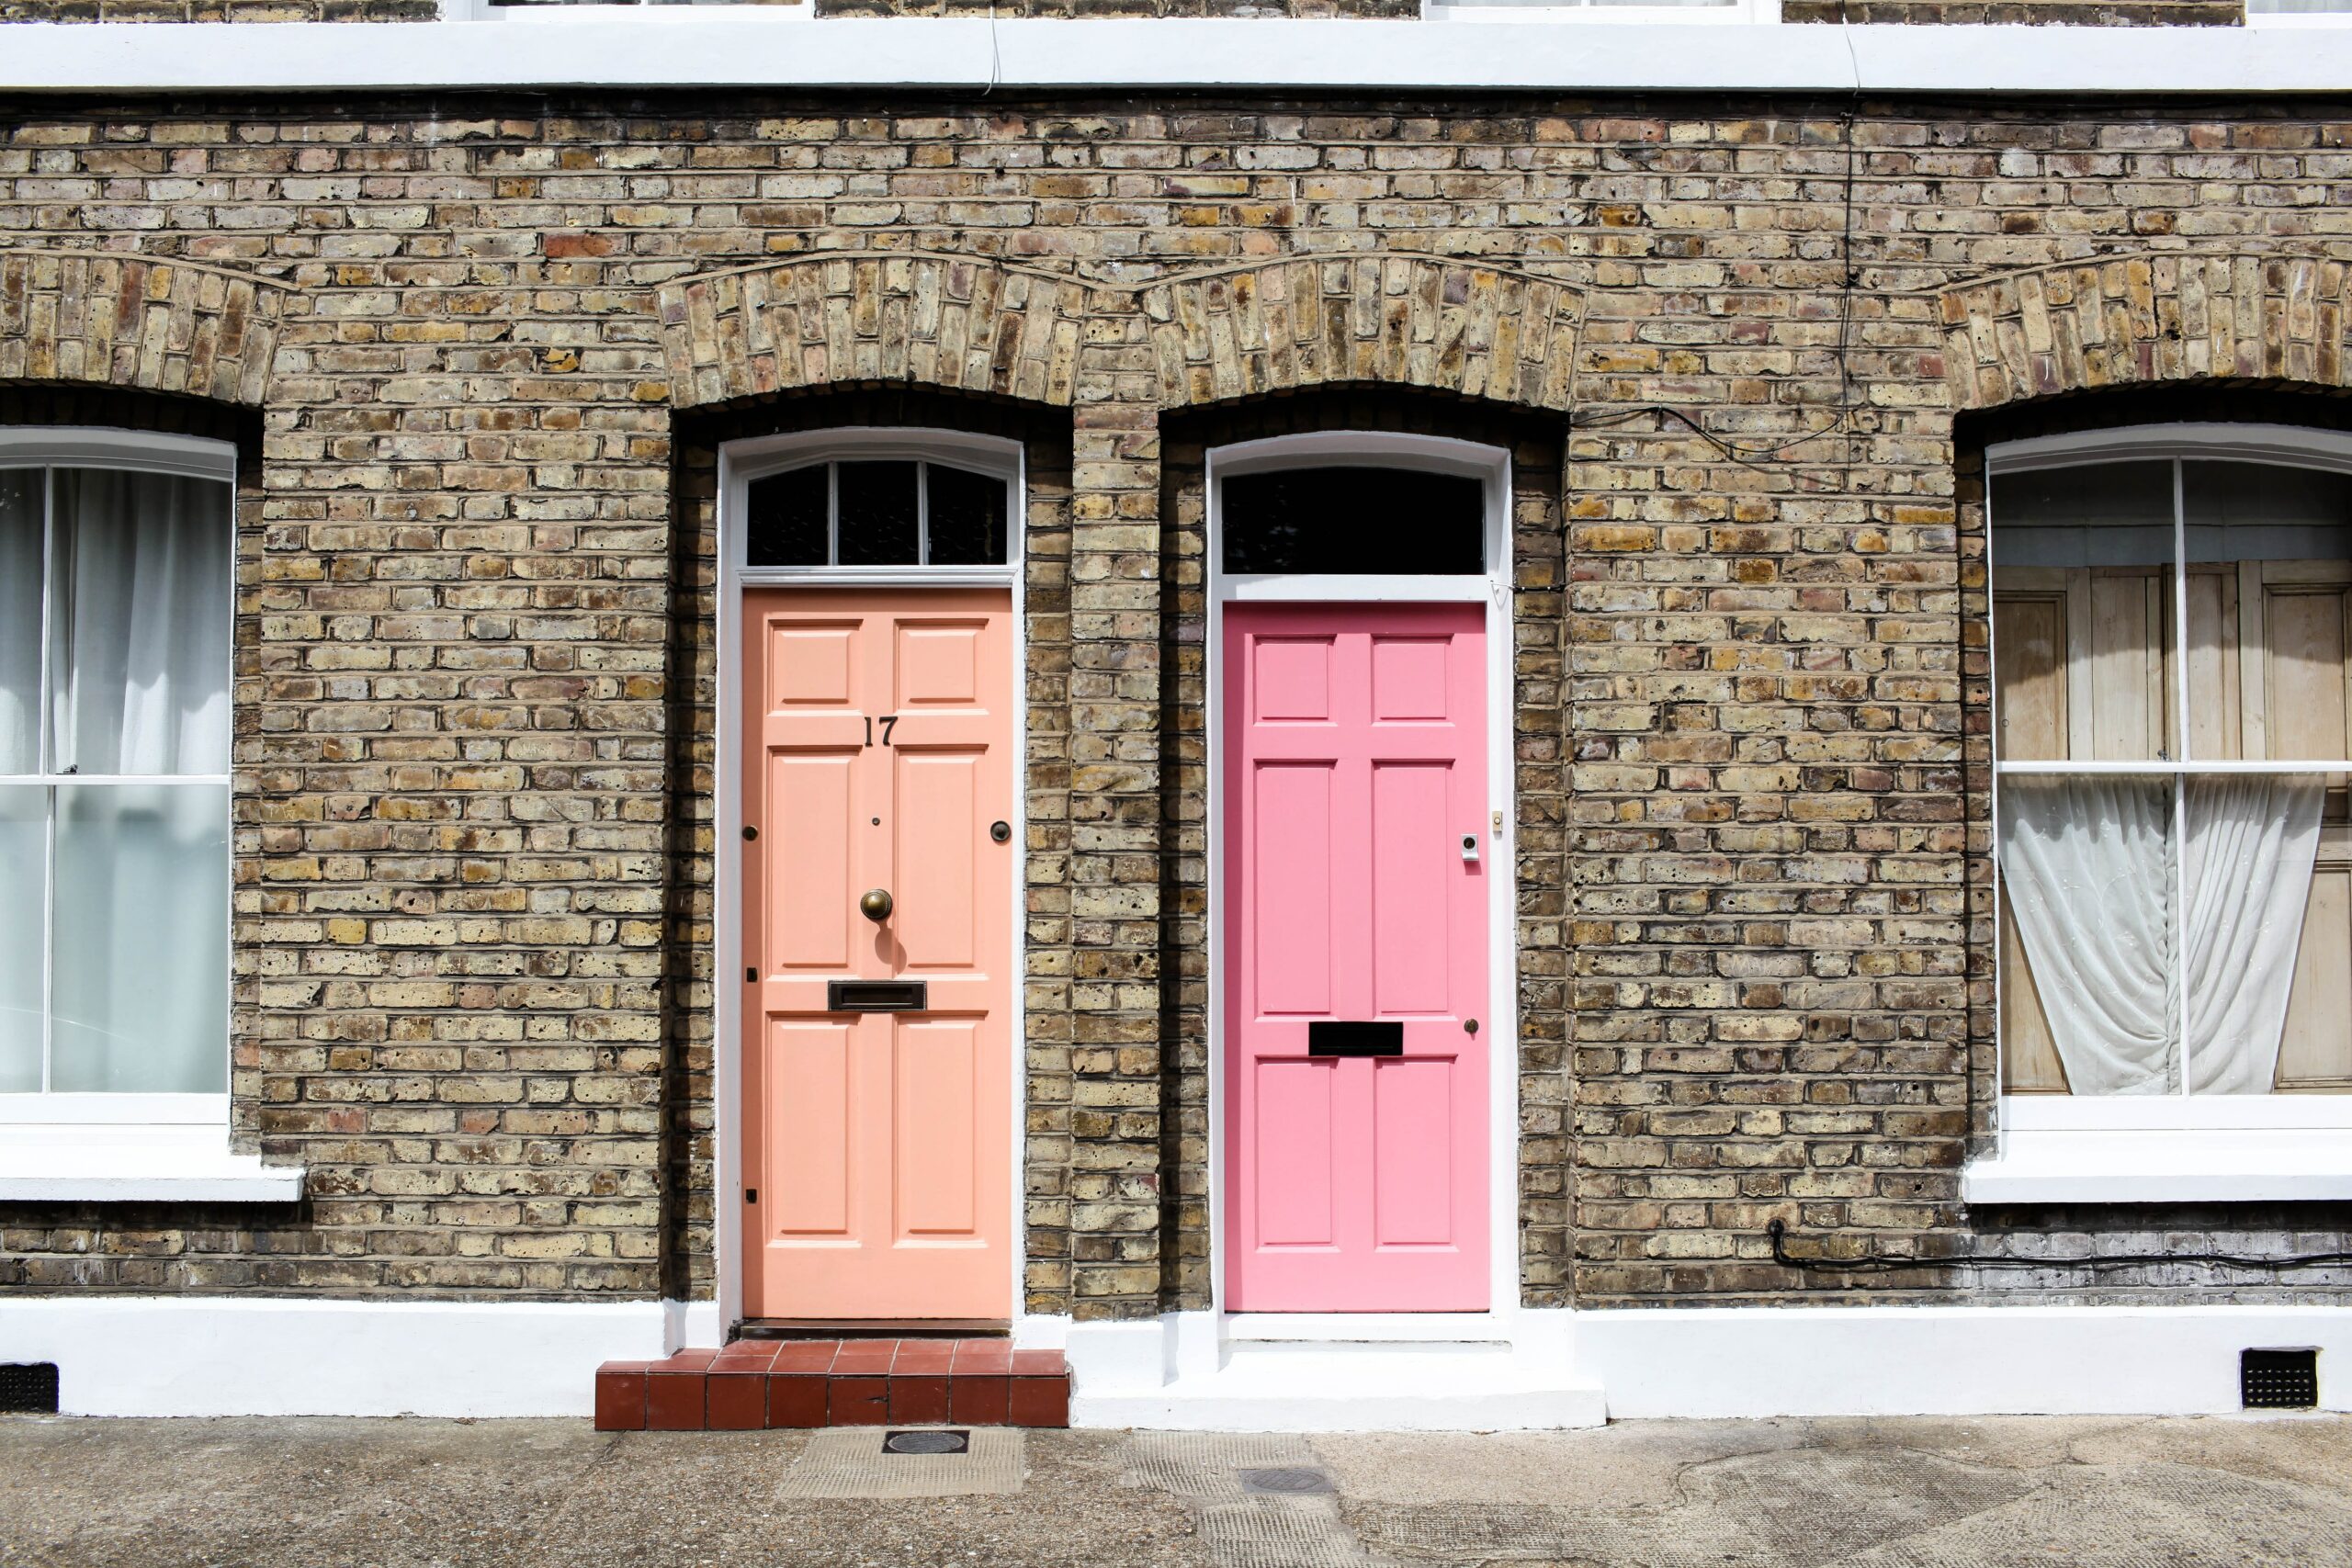 Party Wall Agreement in London: RICS Party Wall Surveyors, Harding Chartered Surveyors